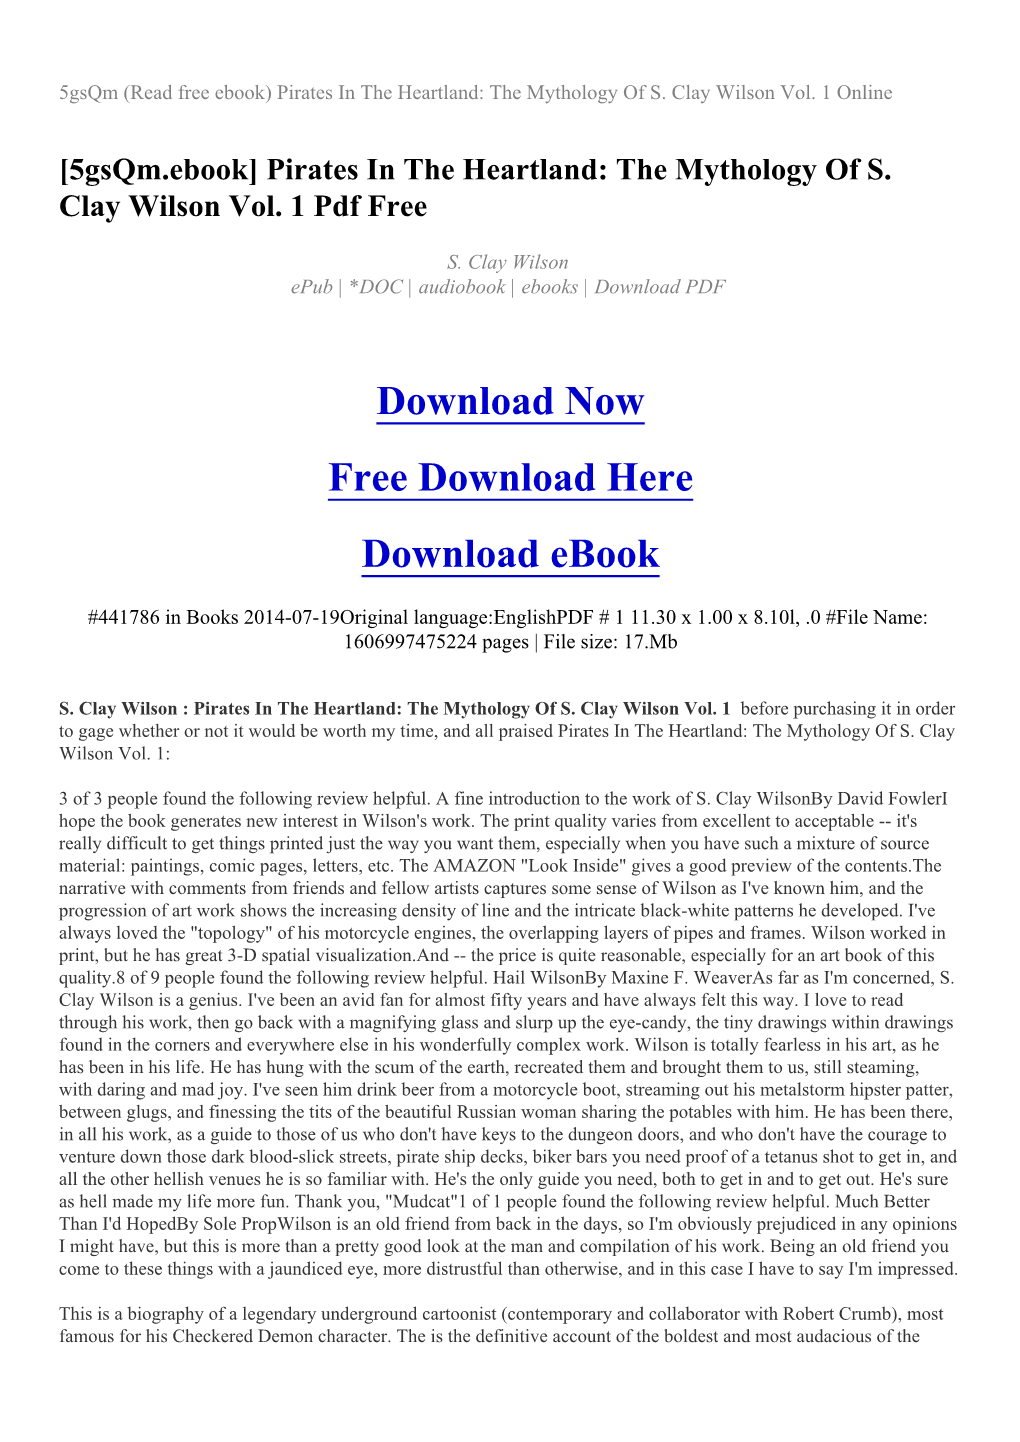 Pirates in the Heartland: the Mythology of S. Clay Wilson Vol. 1 Online